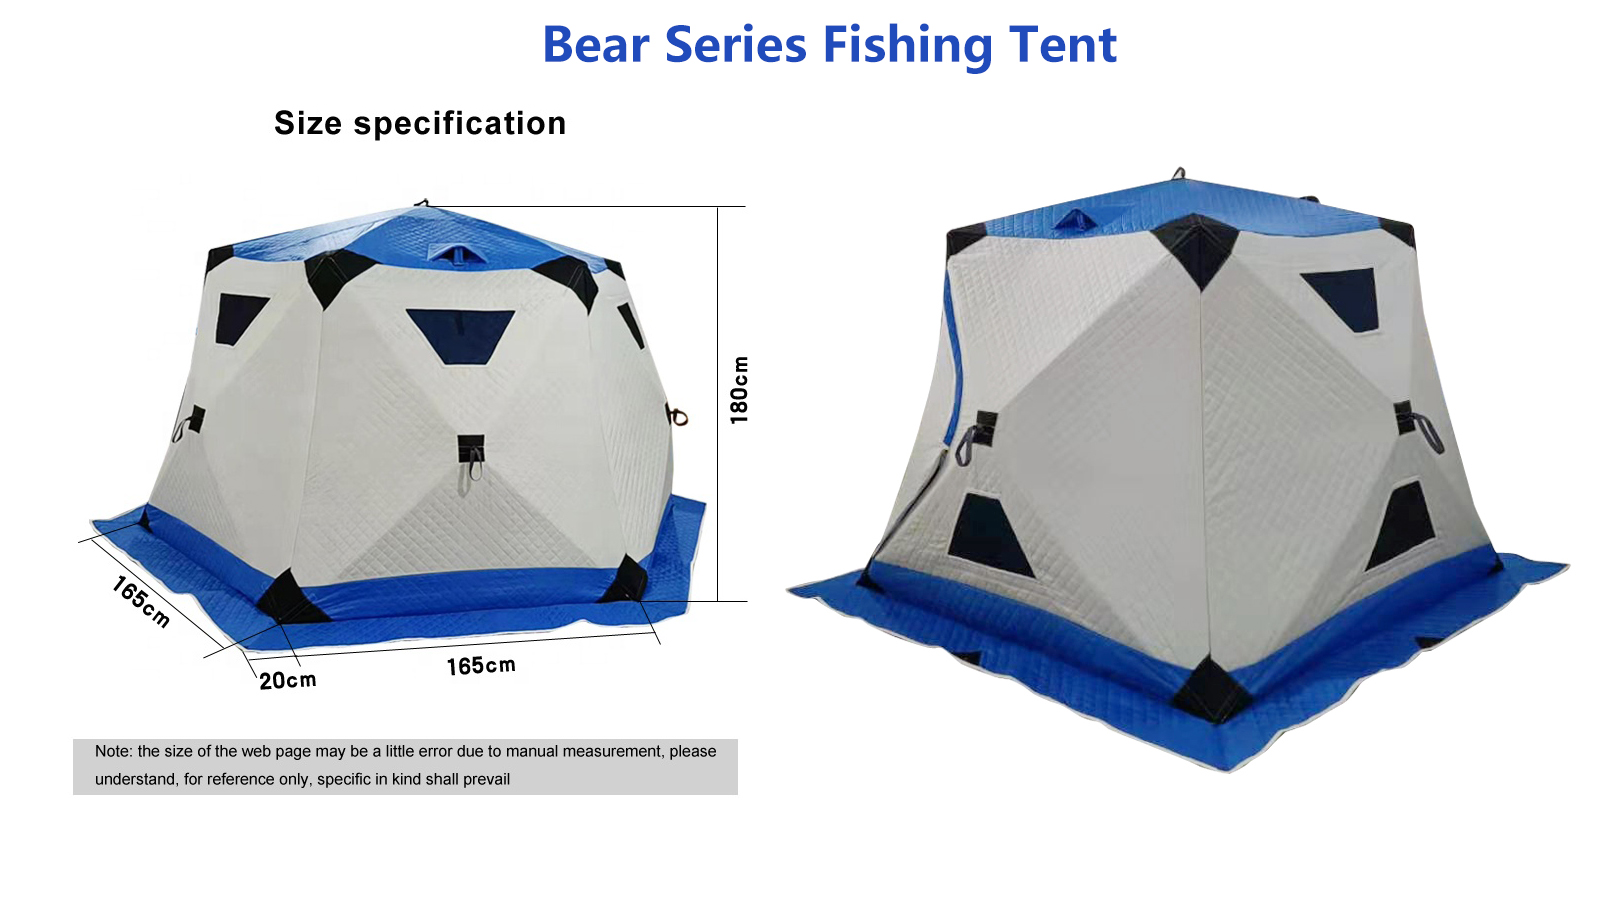 Are you looking for a basic ice fishing shelter?